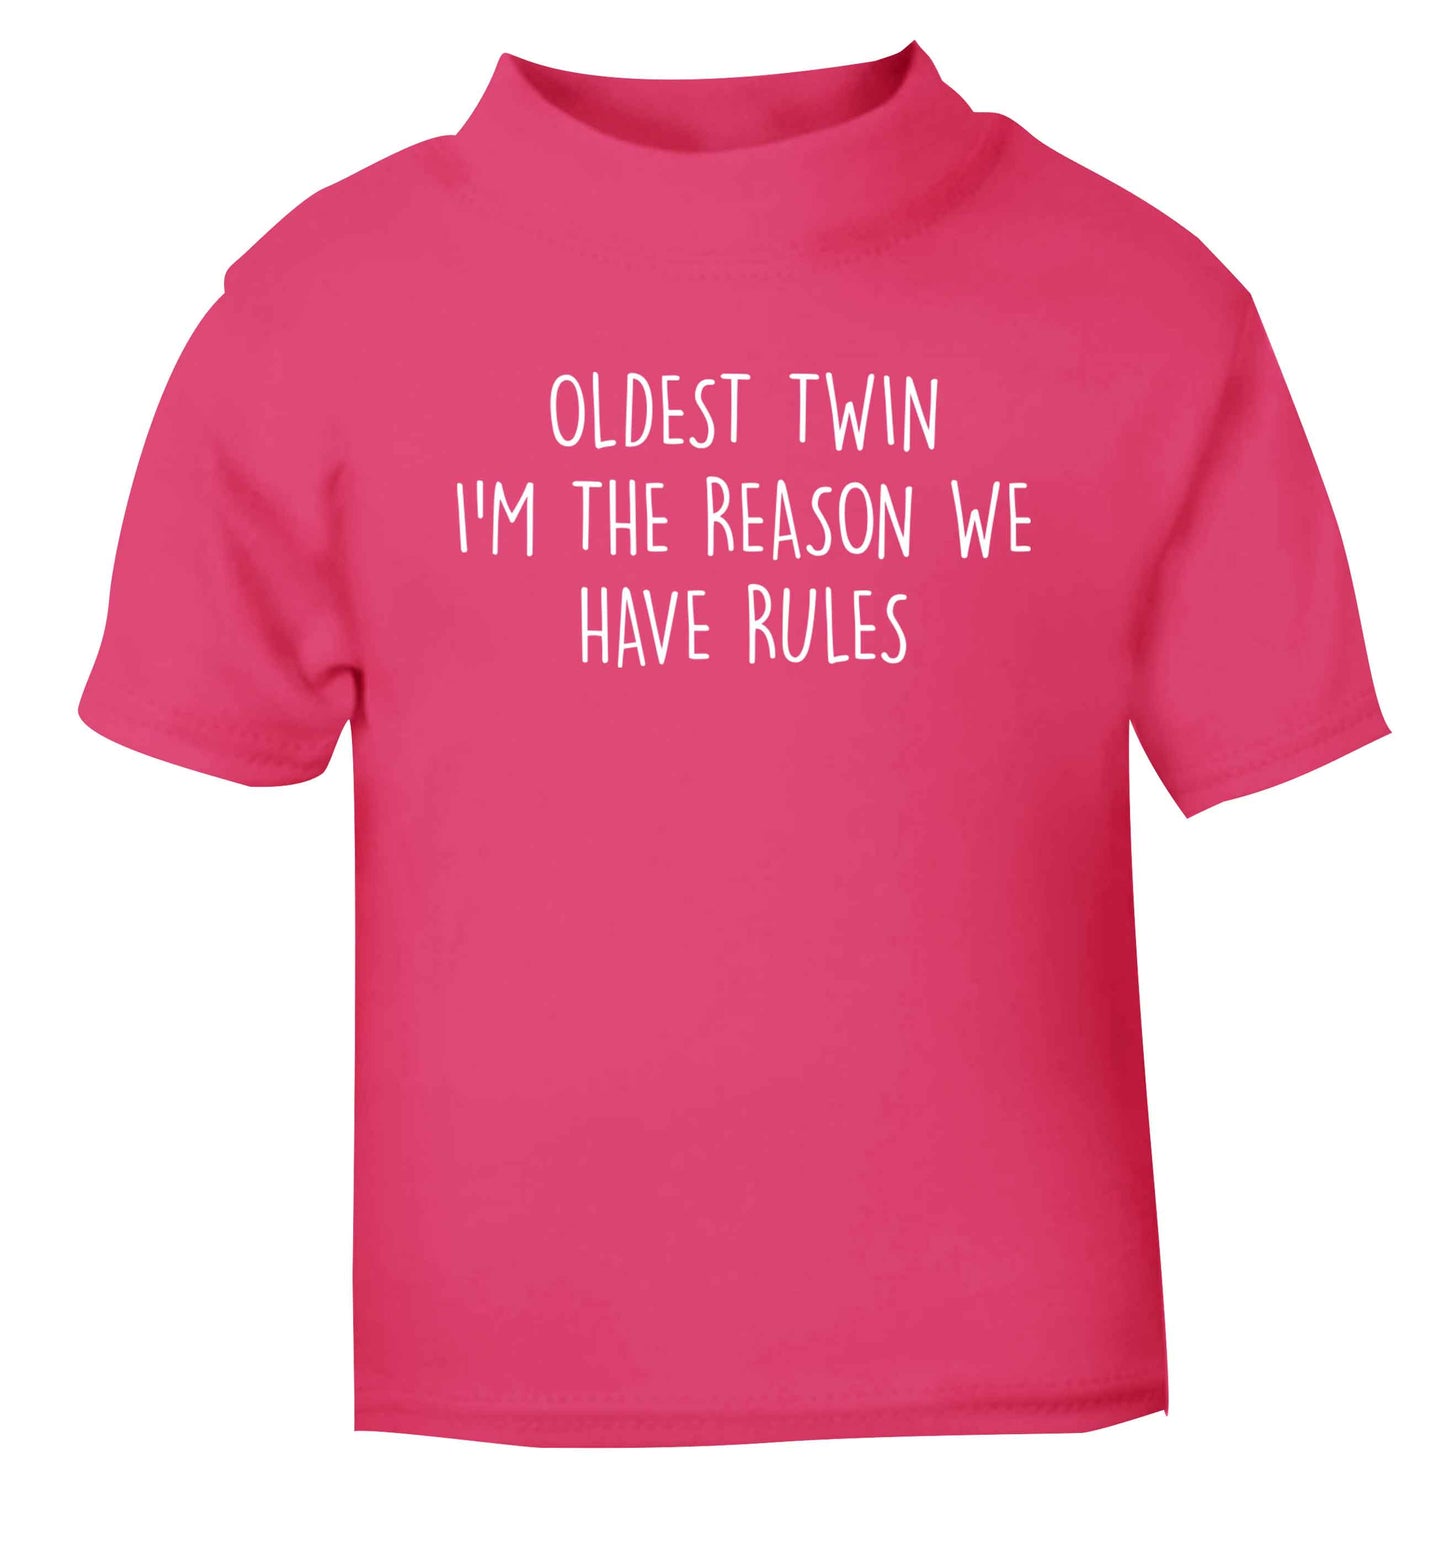 Oldest twin I'm the reason we have rules pink baby toddler Tshirt 2 Years